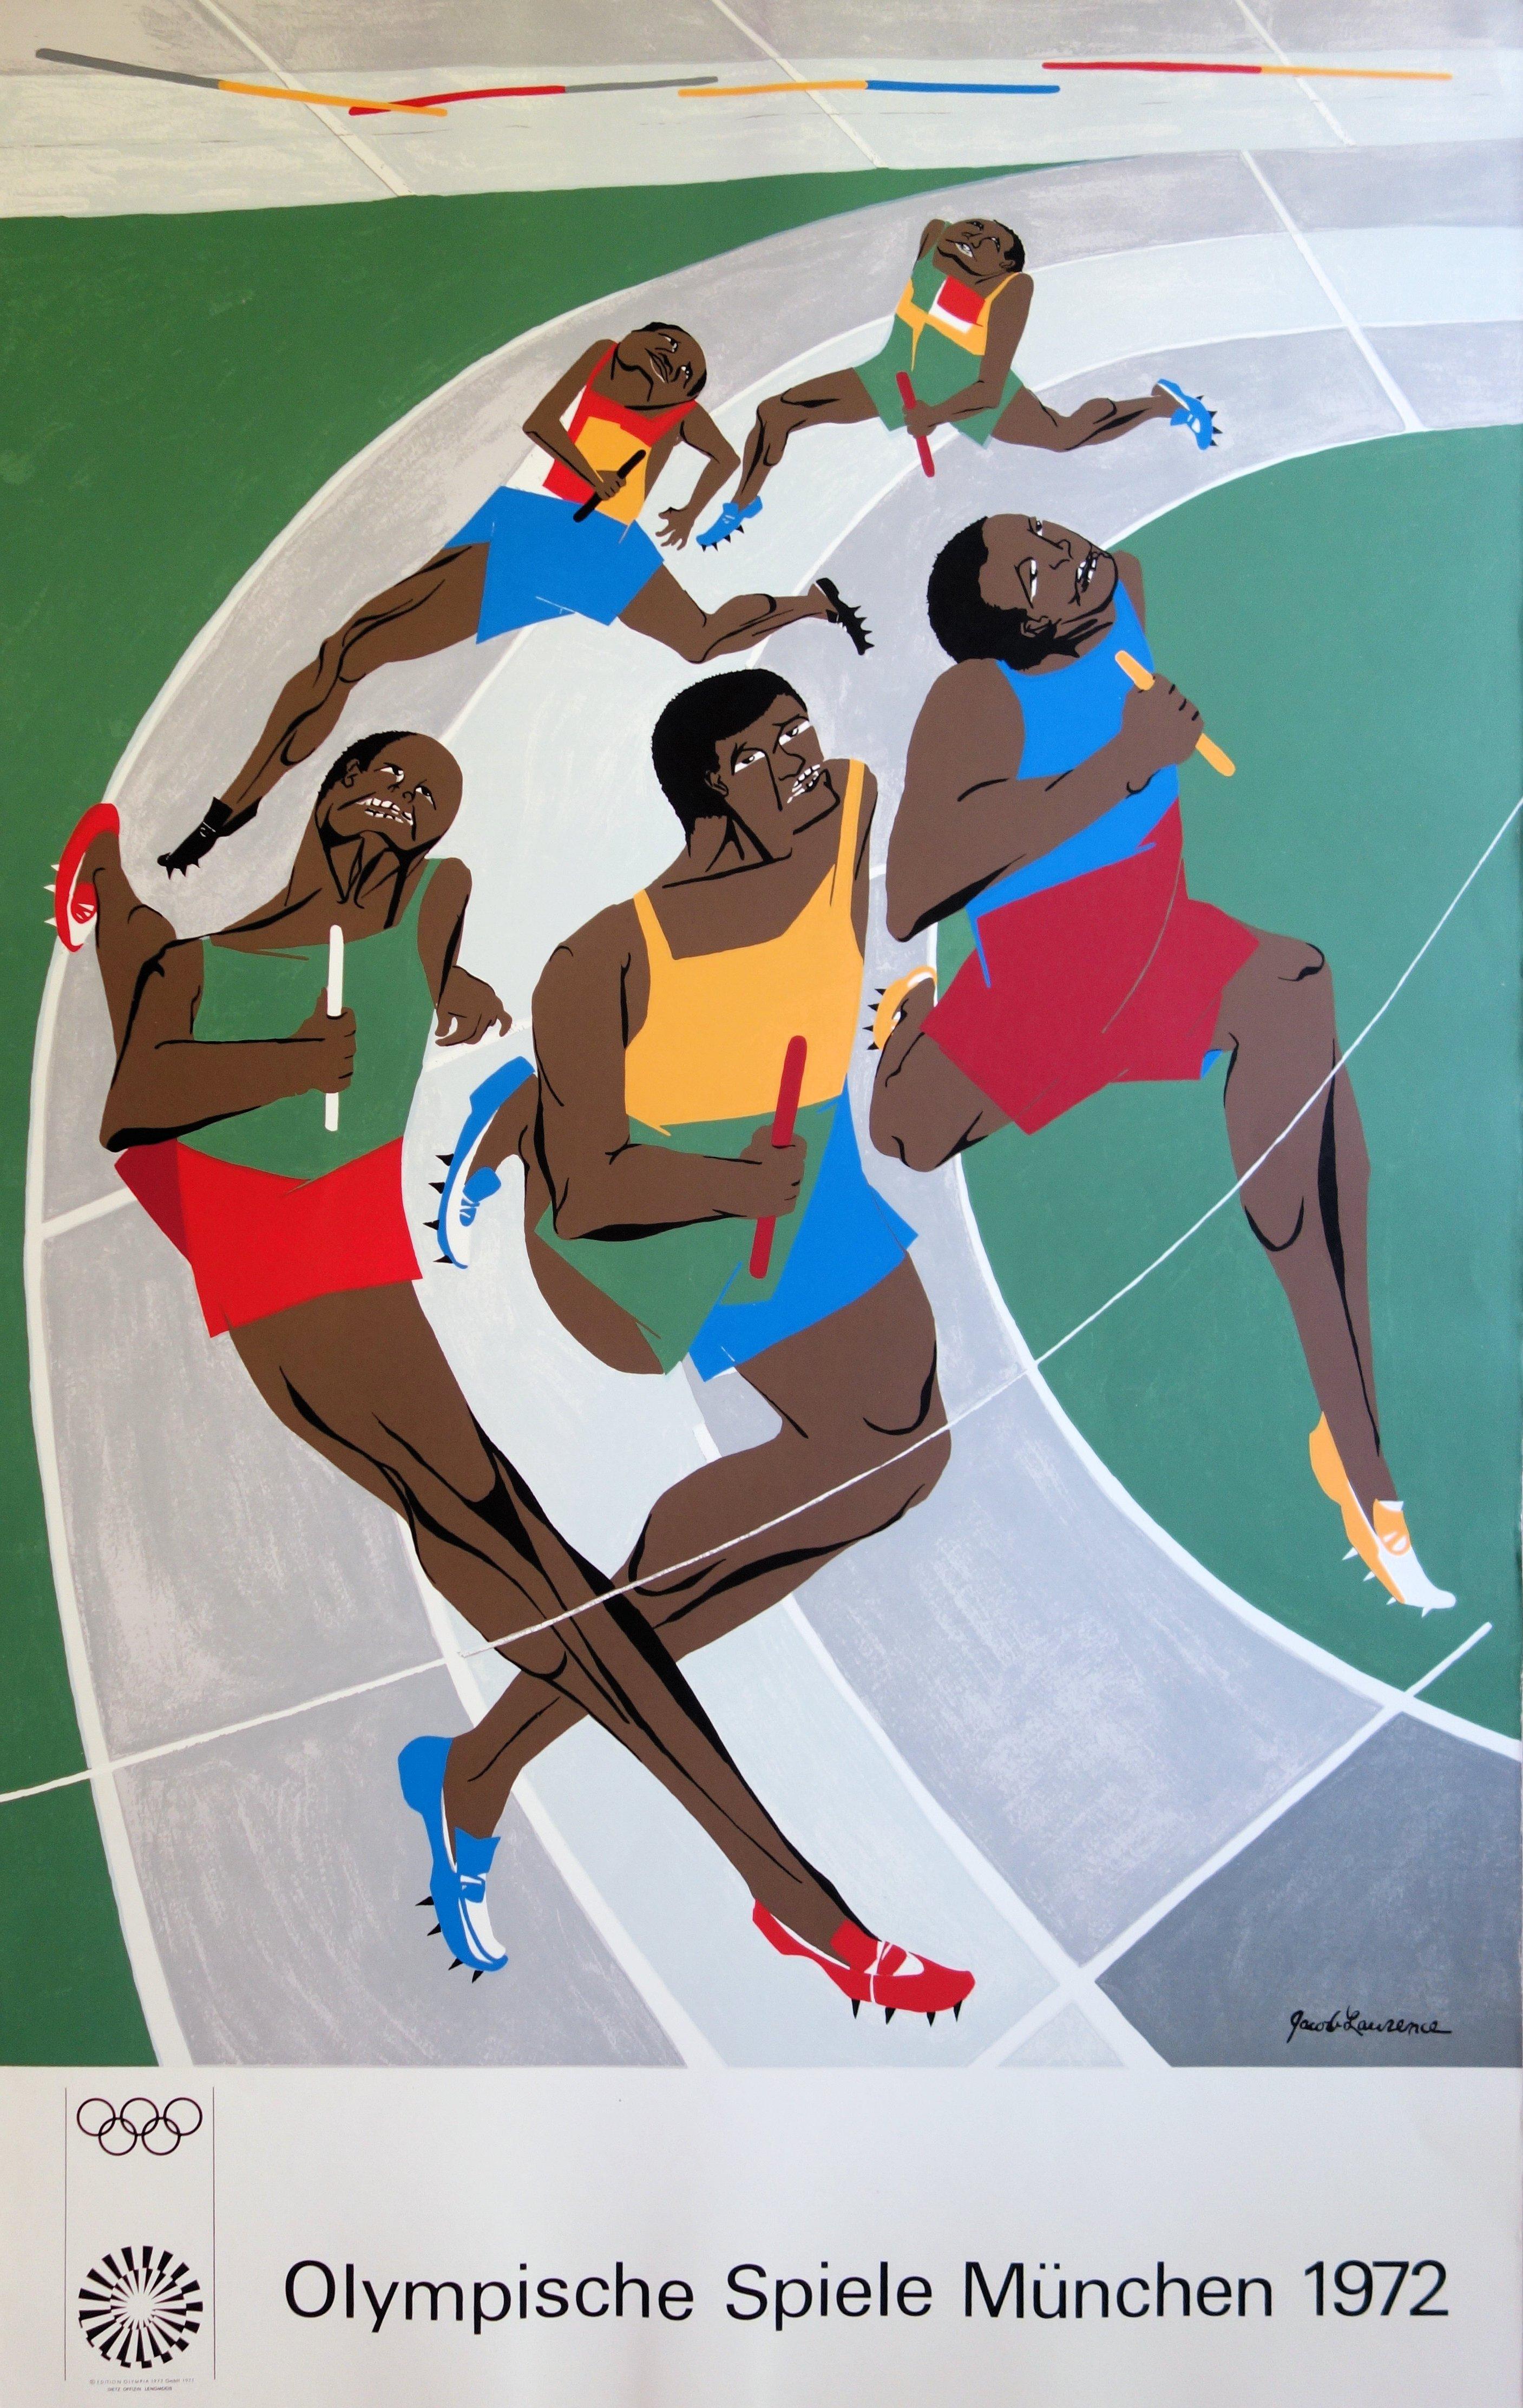 Jacob Lawrence Abstract Print - The Relay Race : Passing the Baton - Lithograph (Olympic Games Munich 1972)